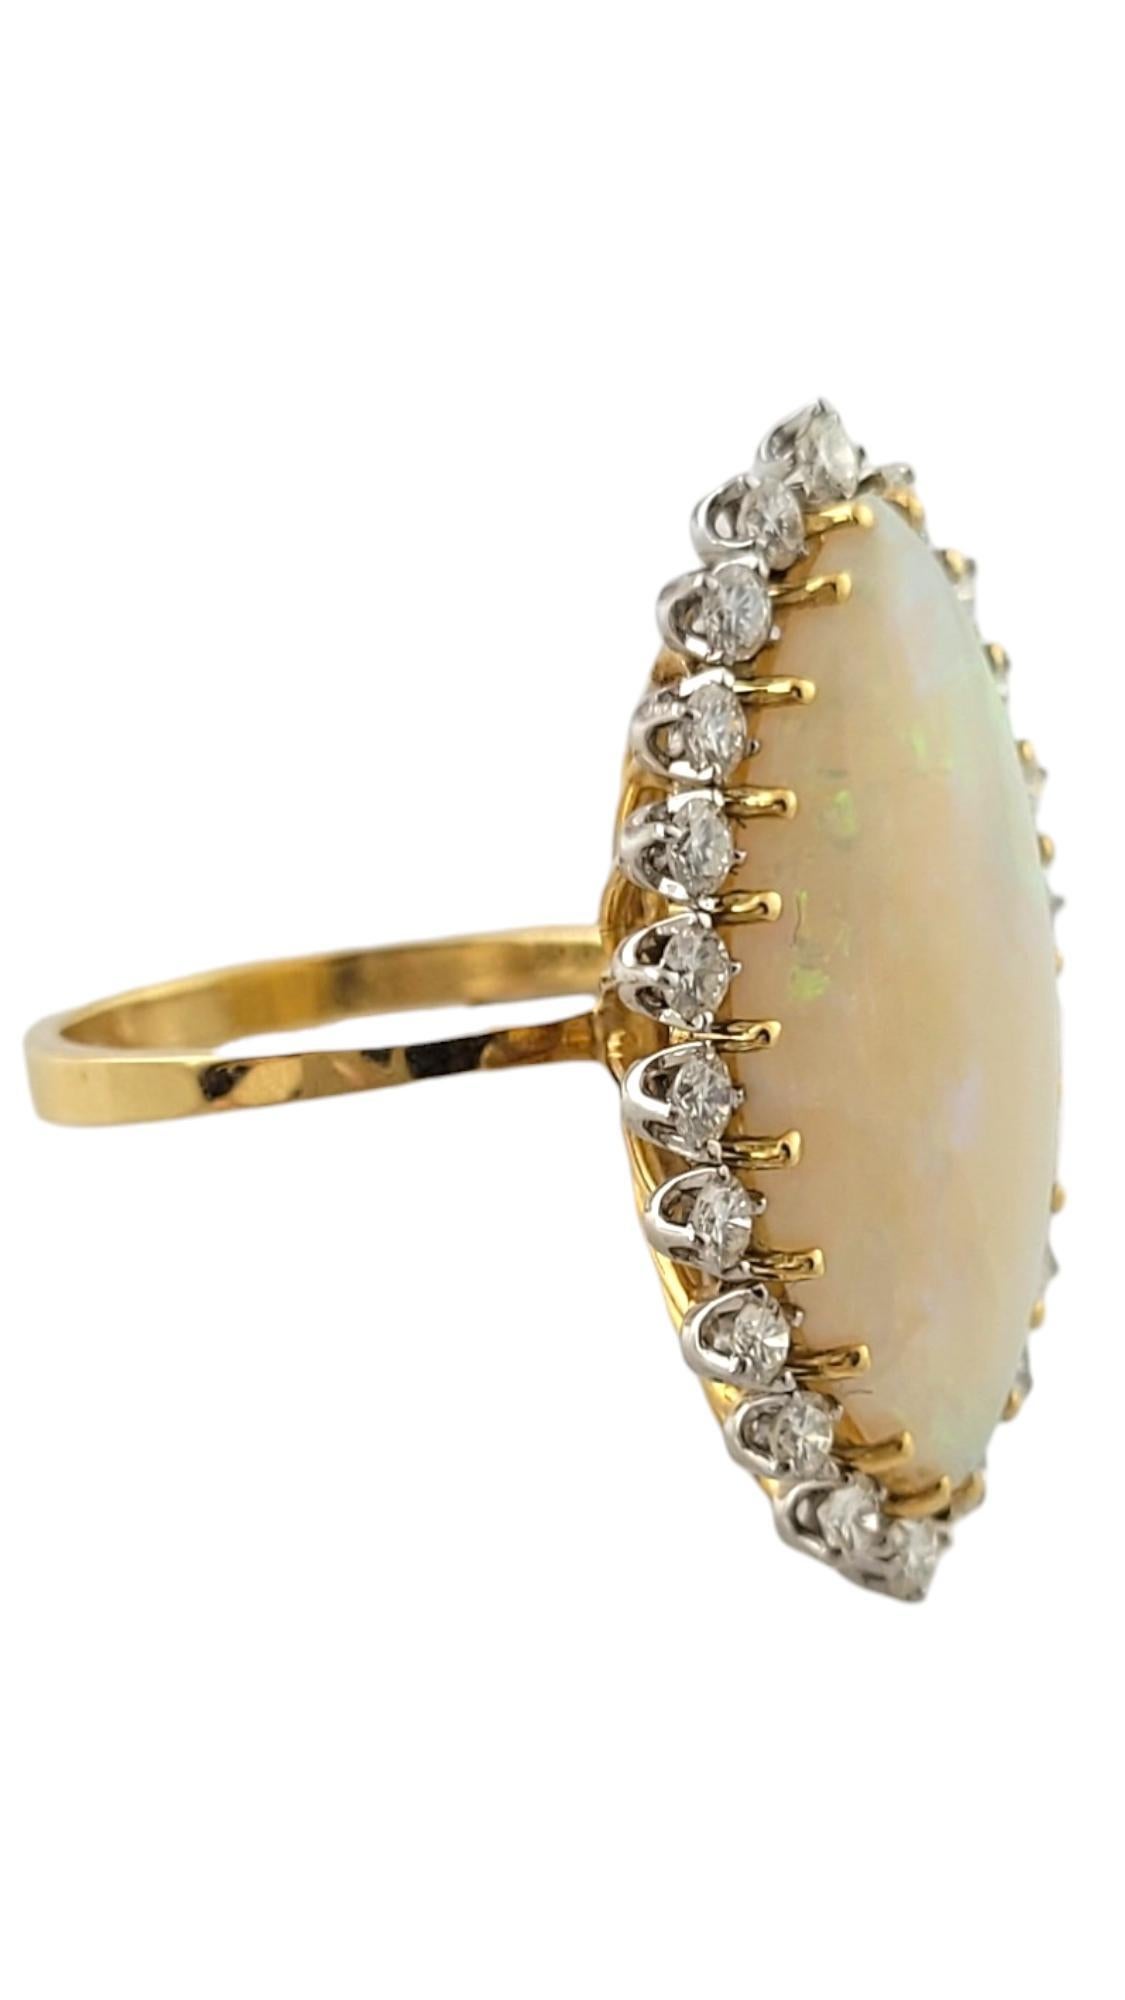 18K Yellow Gold Diamond & Opal Halo Style Ring Size 7.5

This gorgeous 18K yellow gold ring features a gorgeous marquise cabochon cut white opal with a halo of 22 sparkling, round brilliant cut diamonds!

Marquise Cut White Opal is approx. 7.0 cts,